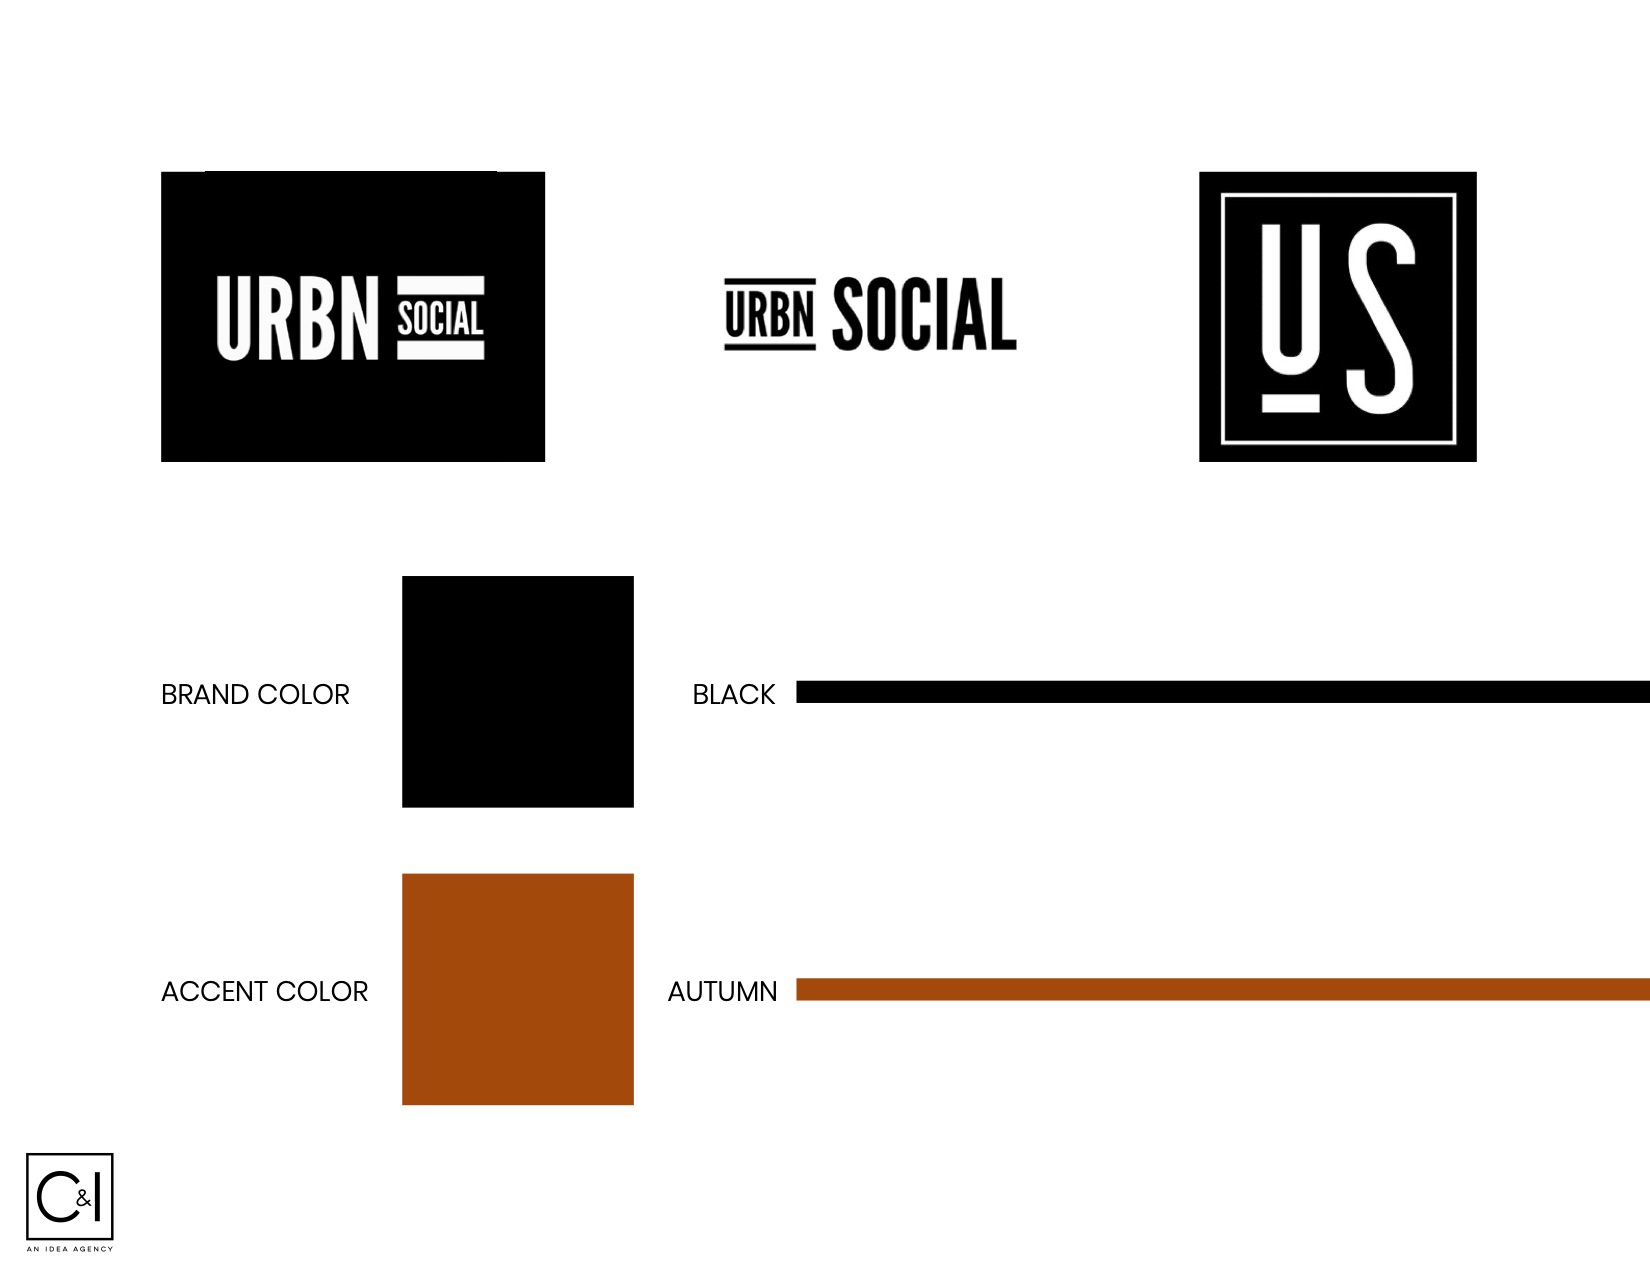 URBN Social Mood Board with various logos and color options